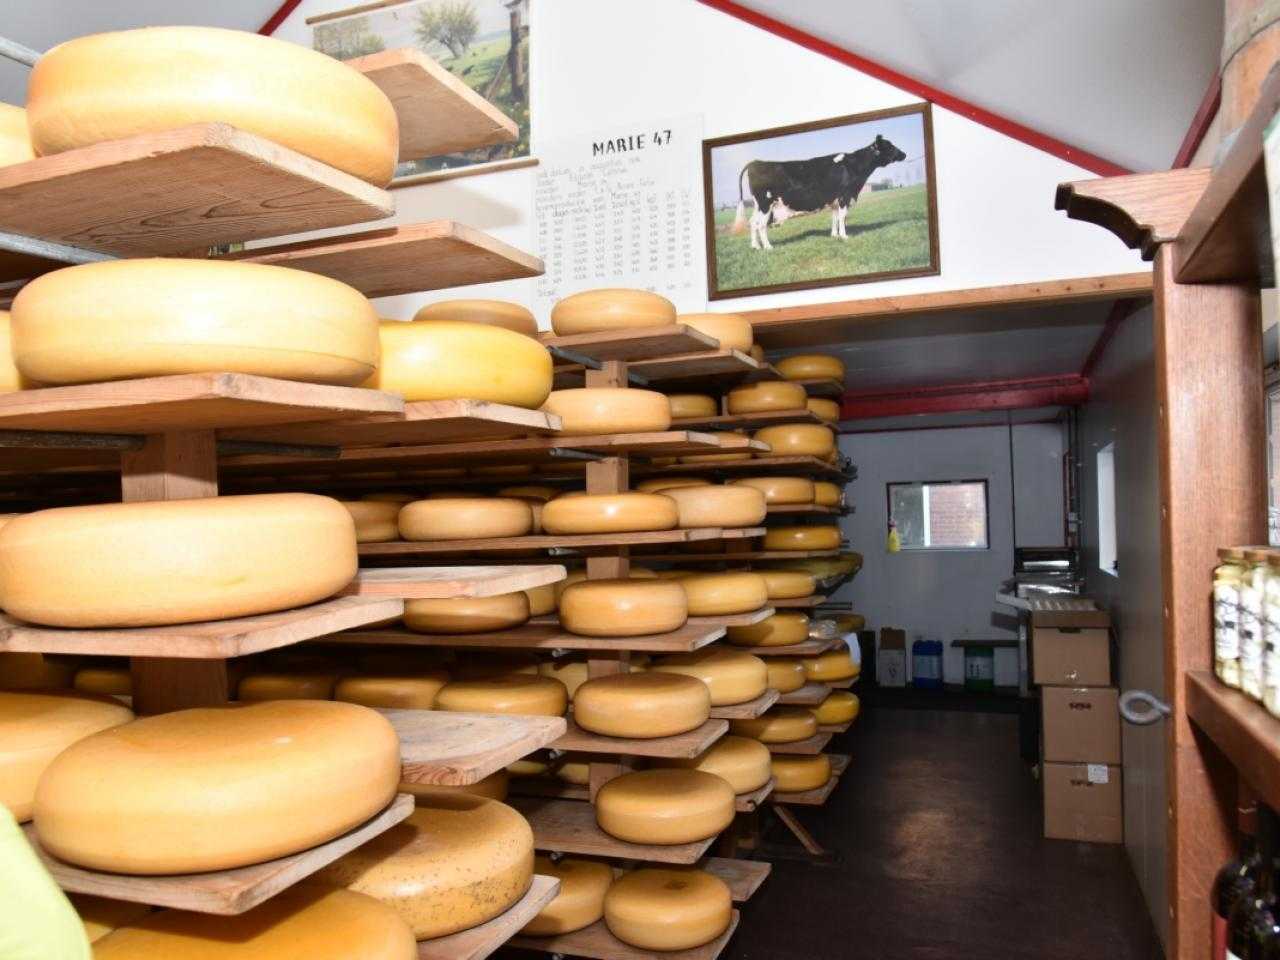 Cheeses on rows of shelves at orphan's dairy farm